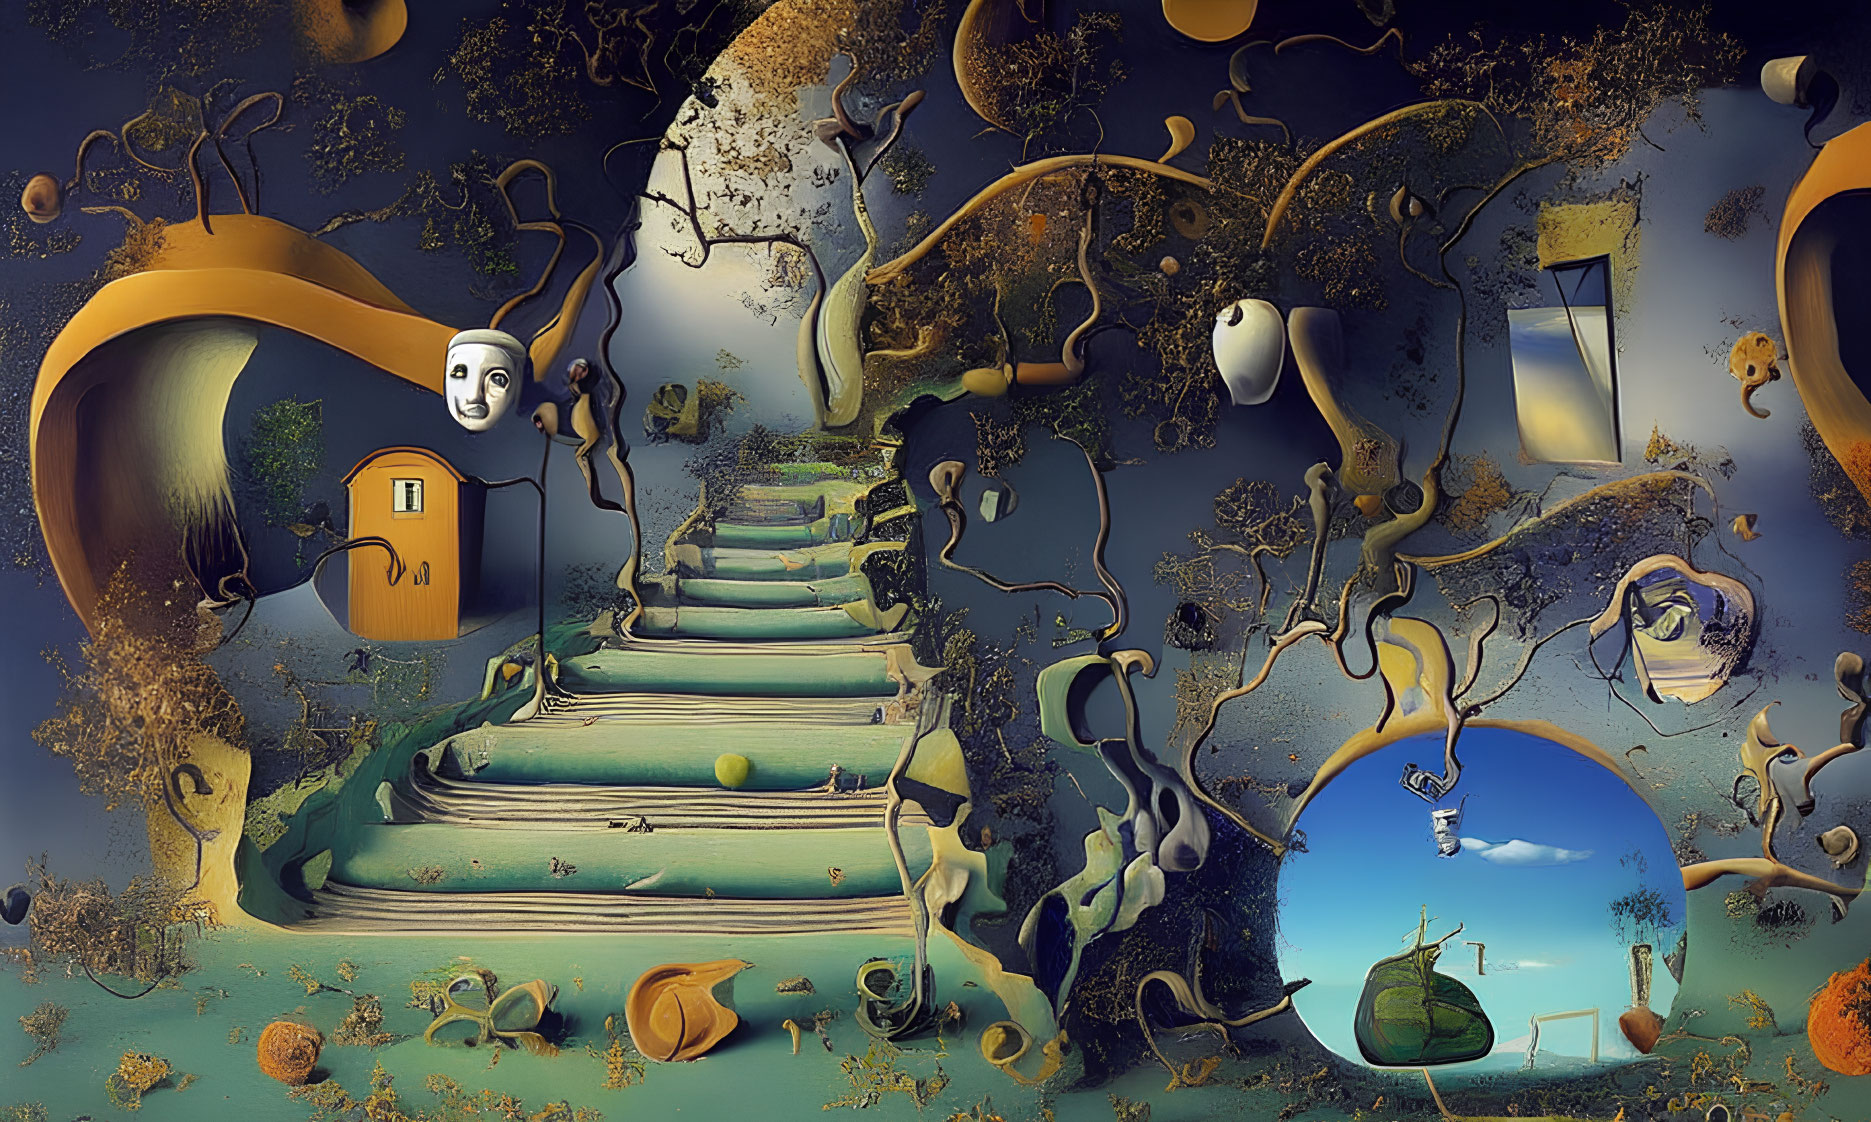 Surreal landscape featuring floating masks, winding stairs, peculiar trees, and gravity-defying objects against